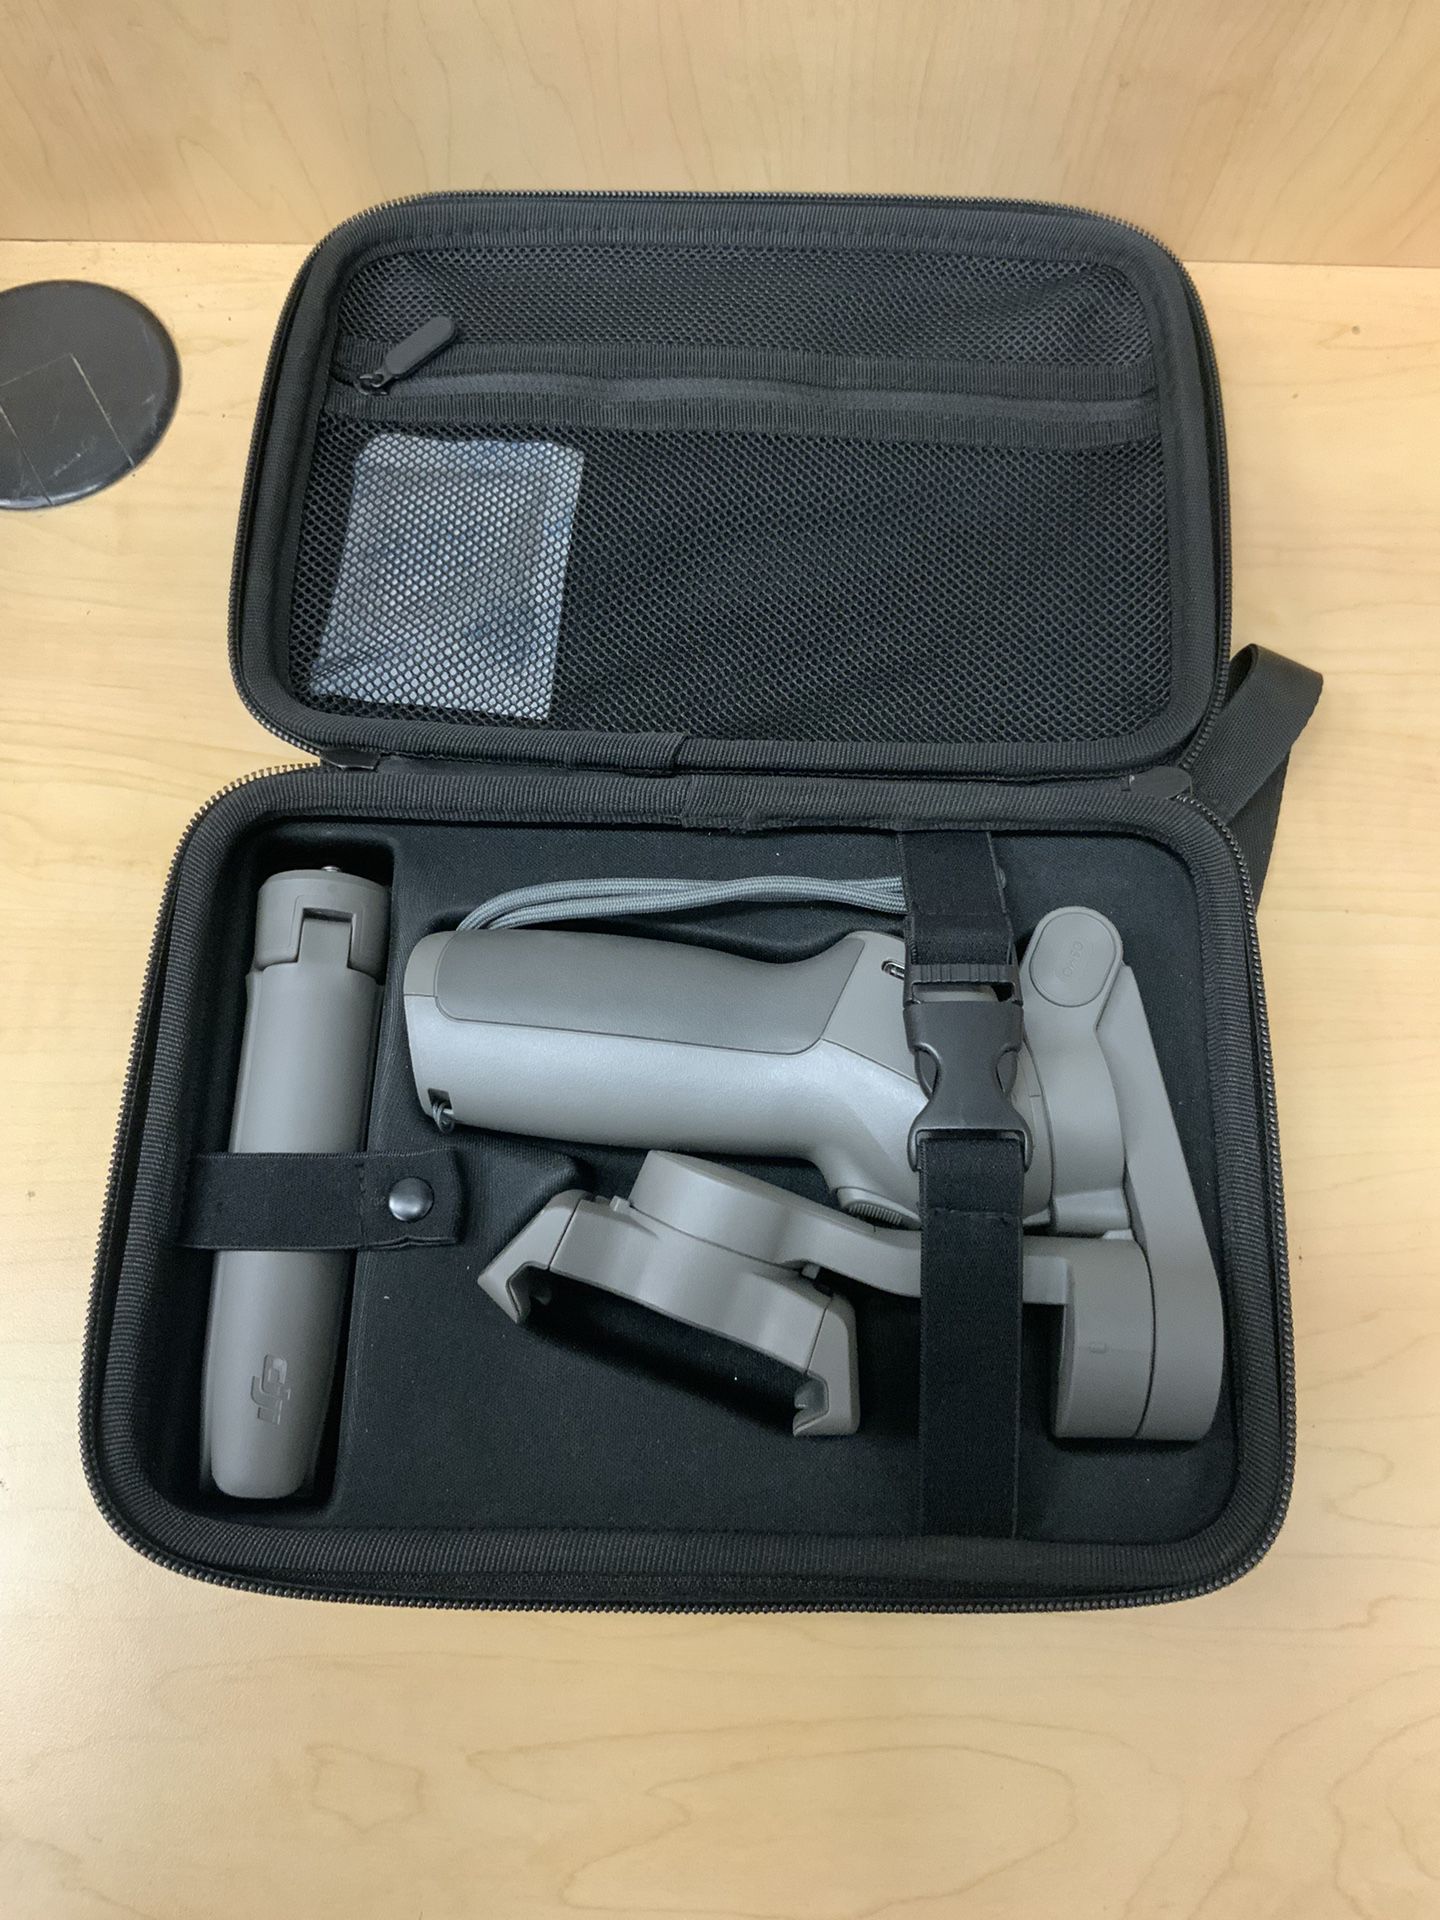 DJI Osmo 3 Mobile Gimbal Stabilizer , 3-Axis , Portable , Foldable ,  Android , iPhone ( Case Included )